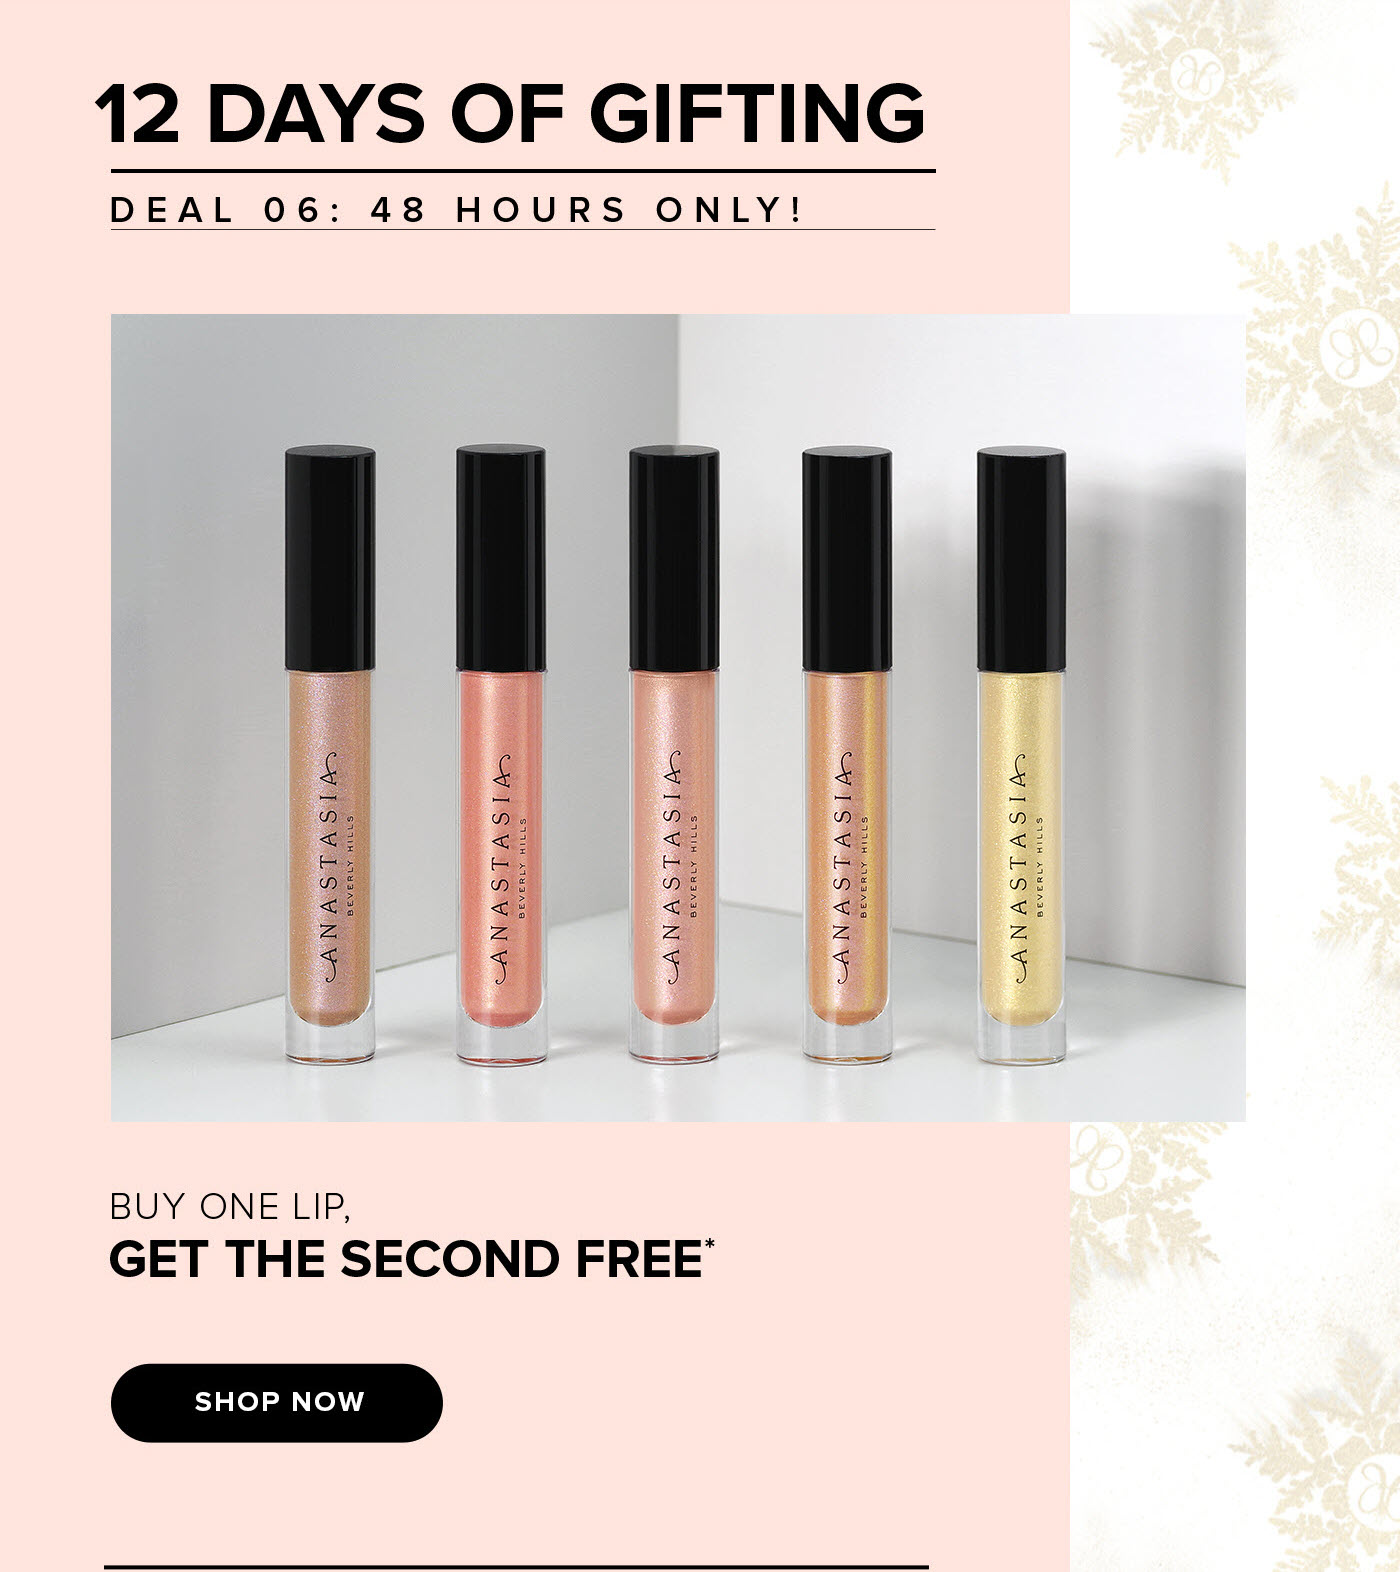 12 Days of Gifting - Deal 6: Buy One Lip, Get the Second Free